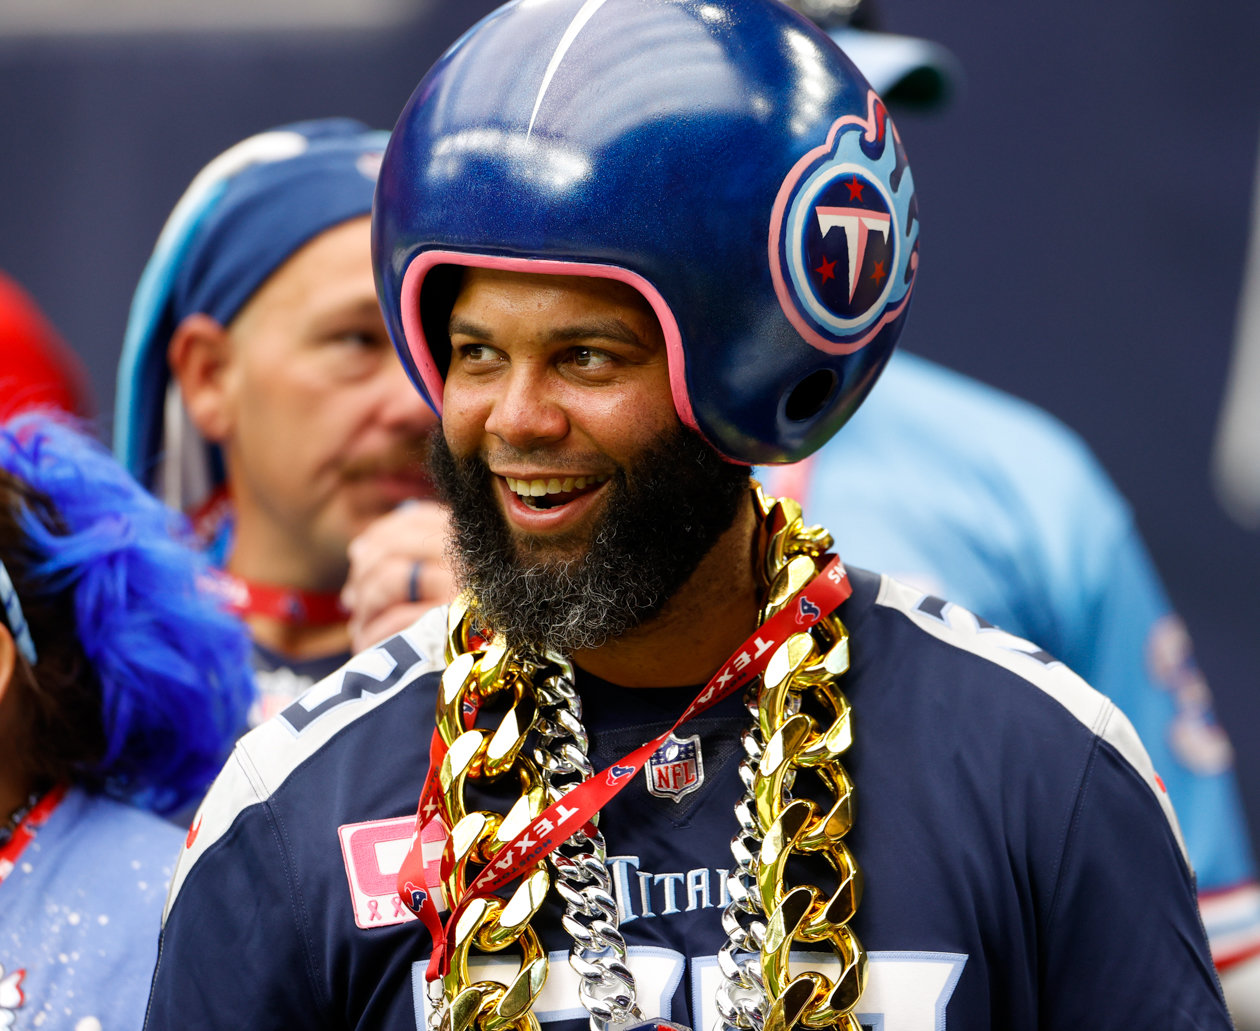 A Tennessee Titans fan before the start of an NFL game between the Texans and the Titans on Oct. 30, 2022 in Houston.